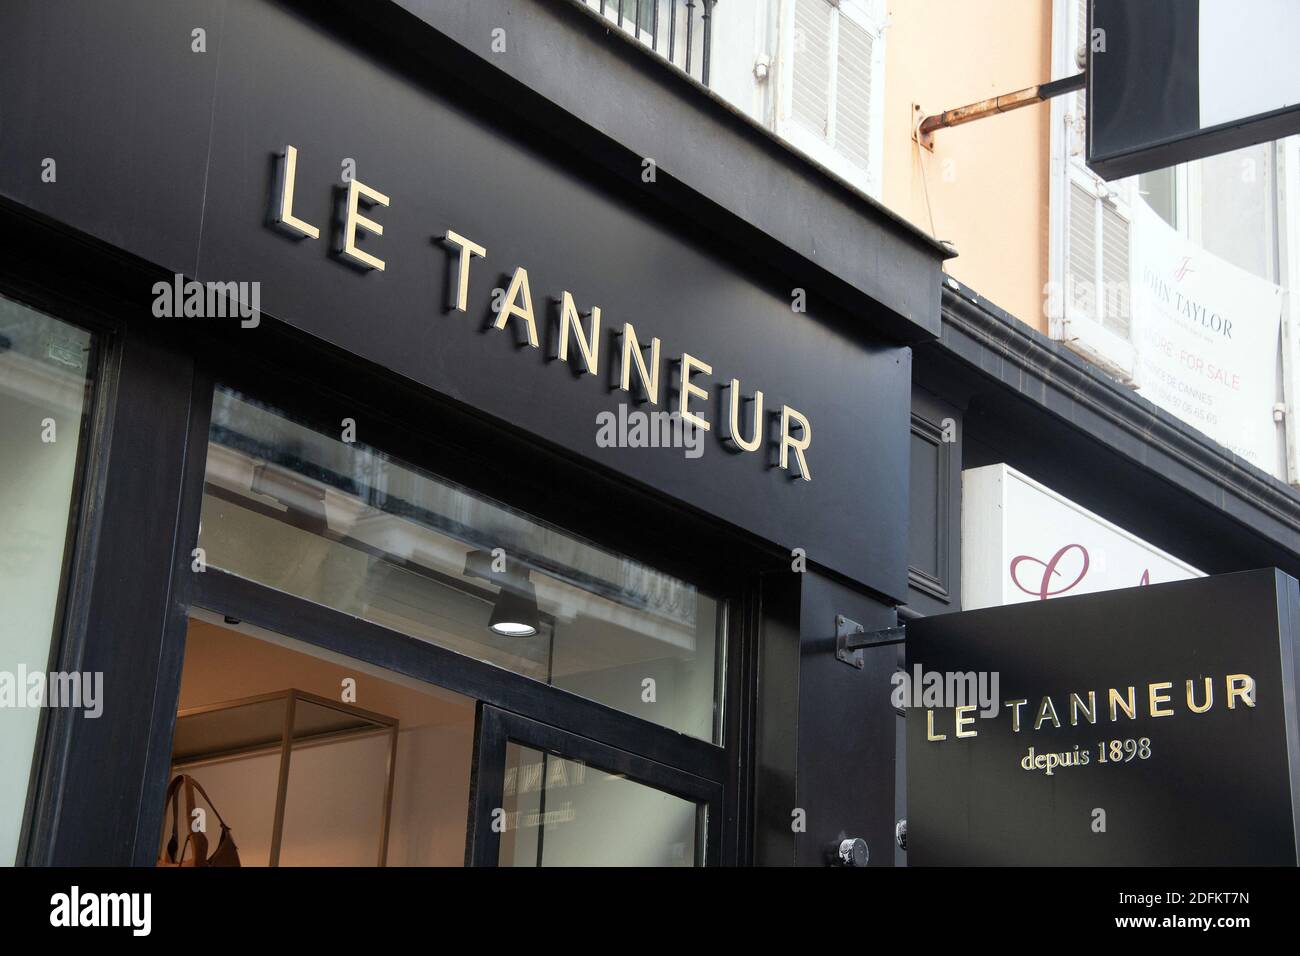 A shop sign of LE TANNEUR, on October 13, 2020 in Cannes, France. Photo by  David Niviere/ABACAPRESS.COM Stock Photo - Alamy